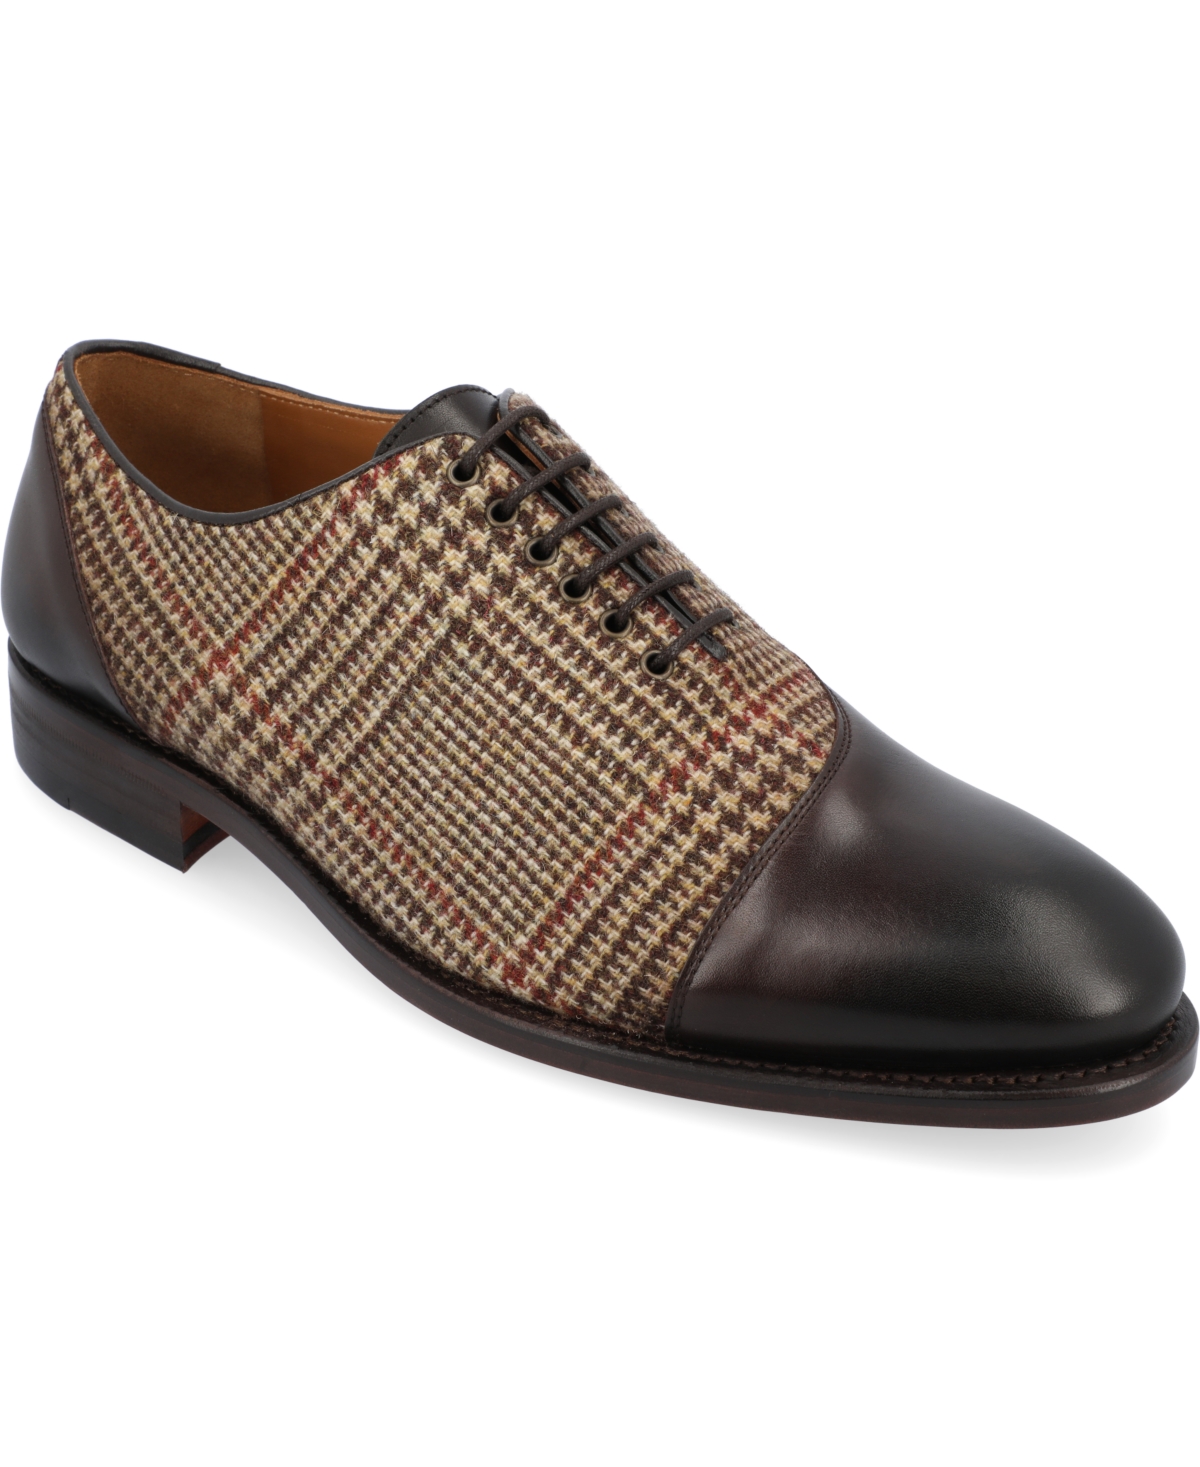 1950s Men’s Shoes | Boots, Greaser, Rockabilly Taft Mens Paris Handcrafted Leather and Wool Asymmetrical Oxford Lace-up Dress Shoes - Plaid $325.00 AT vintagedancer.com